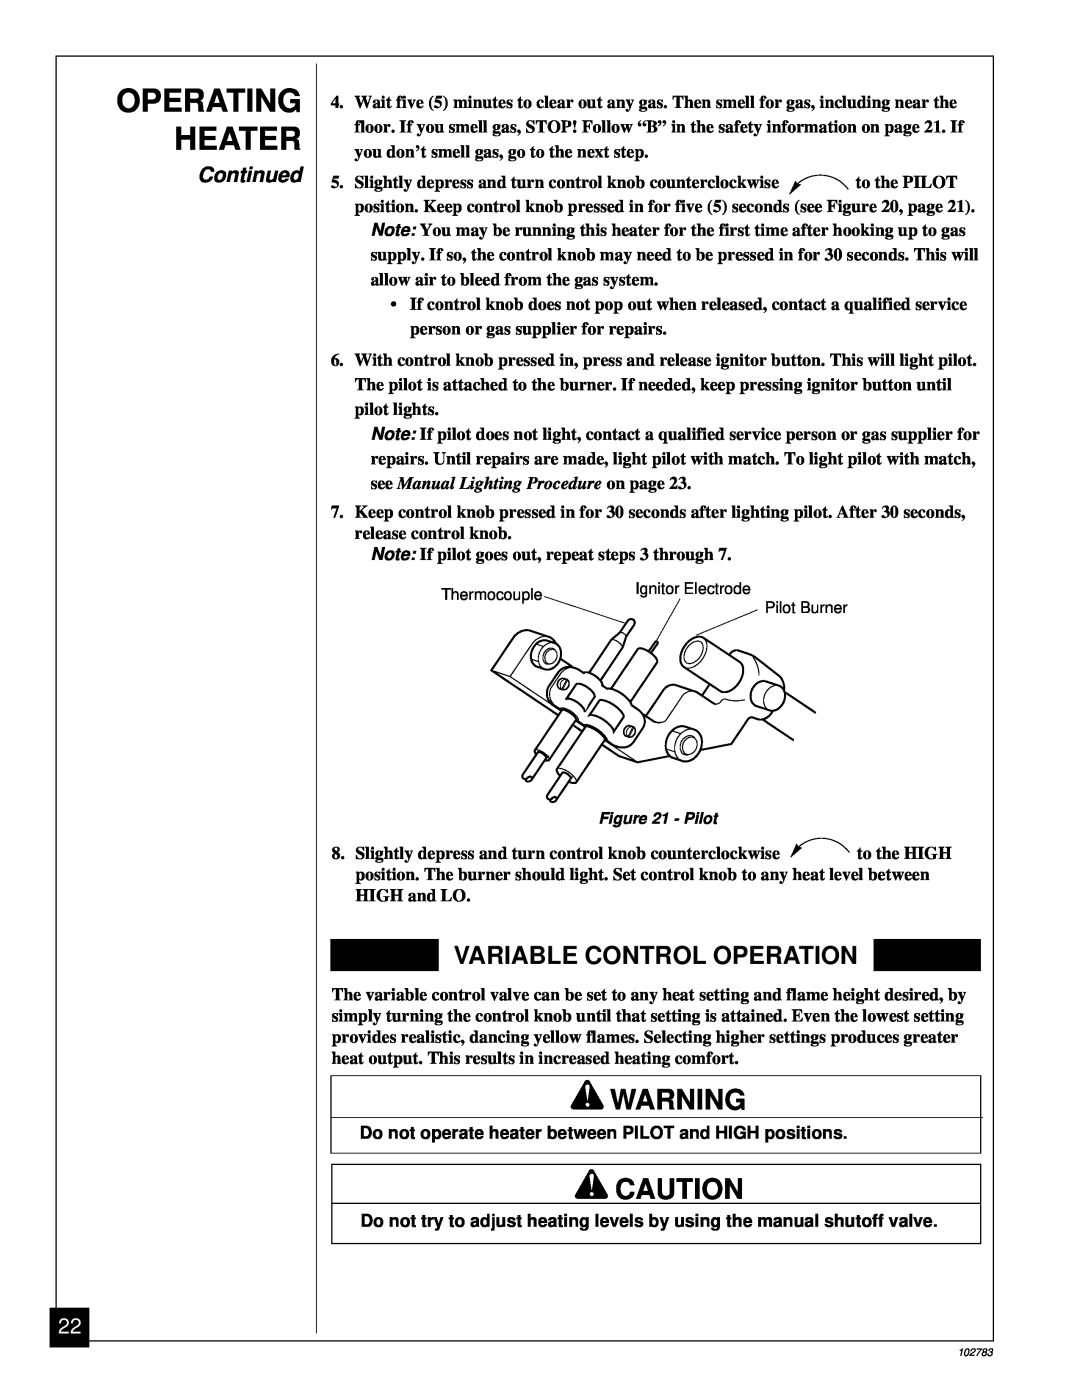 Desa 102783-01B installation manual Operating Heater, Variable Control Operation, Continued 